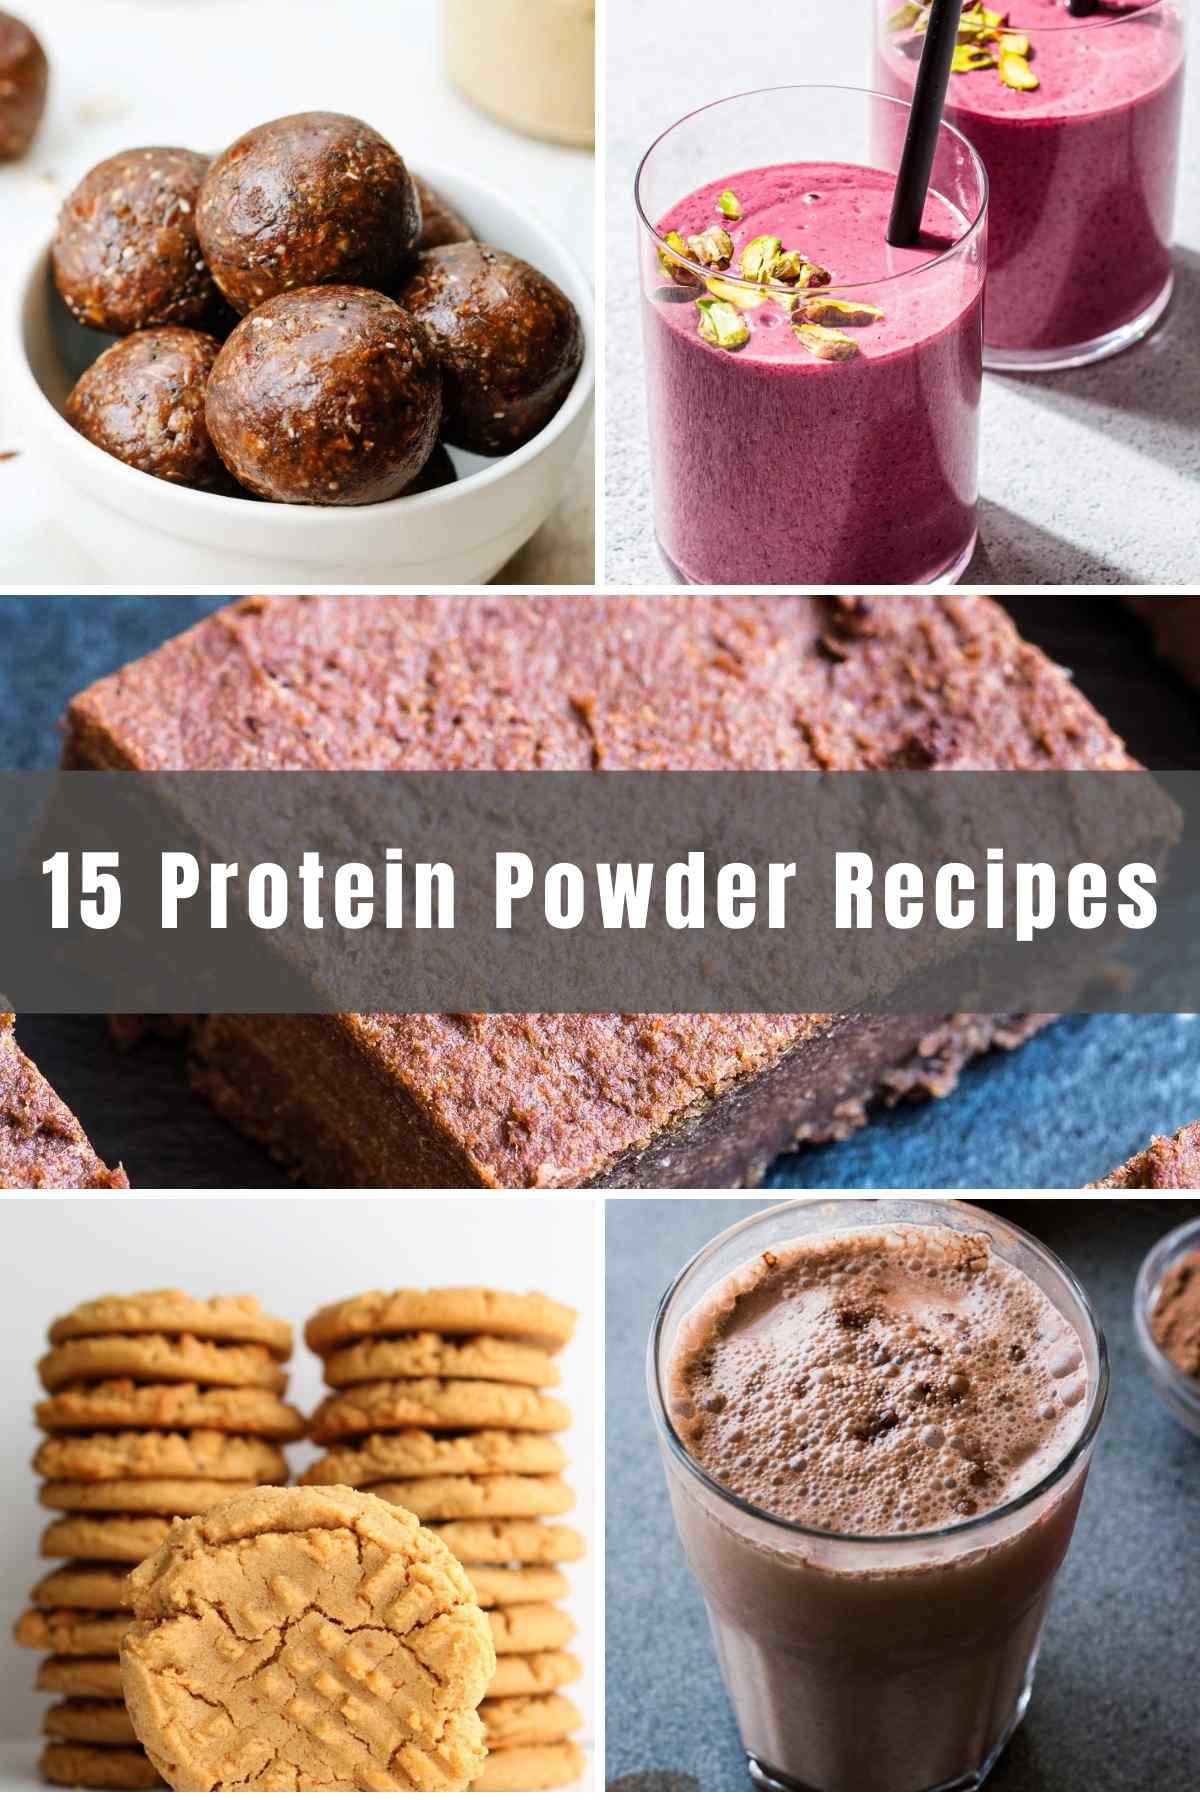 Whether you’re looking to lose weight, make healthier choices or just switch things up a bit - you’ve come to the right place. Below you will find 15 Easy Protein Powder Recipes from drinks to desserts that’ll easily satisfy any craving!